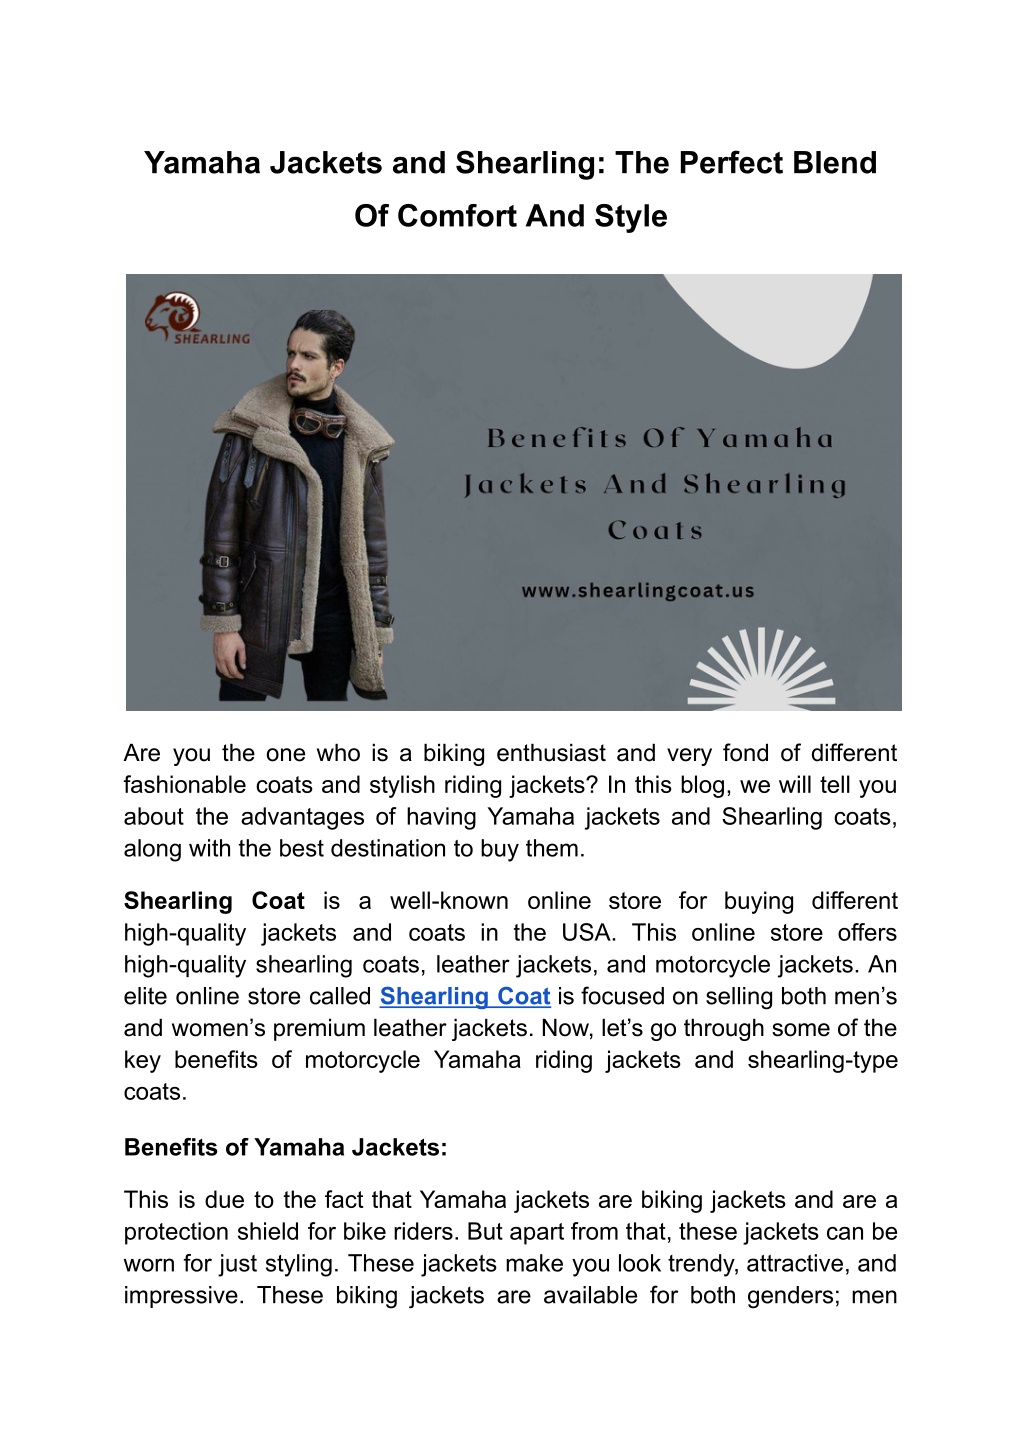 PPT - Yamaha Jackets and Shearling_ The Perfect Blend Of Comfort And ...